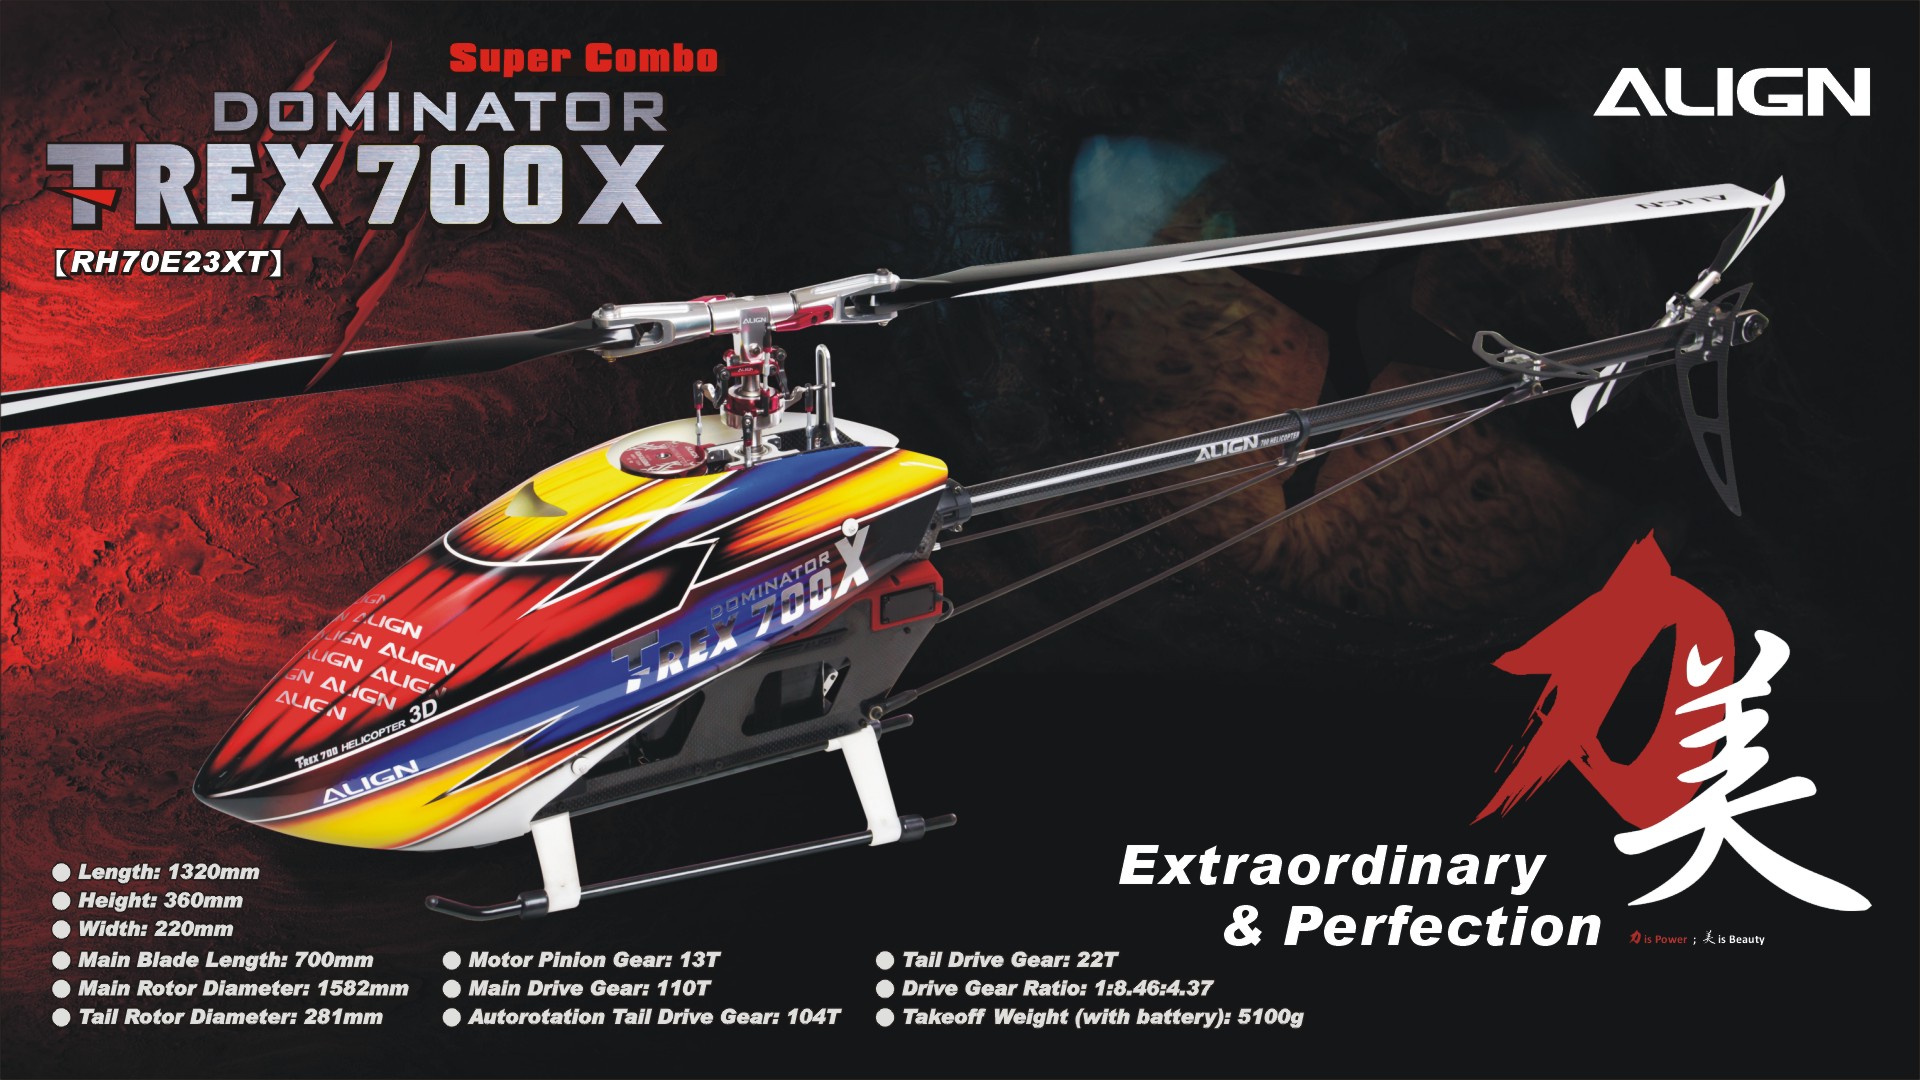 700 rc helicopter